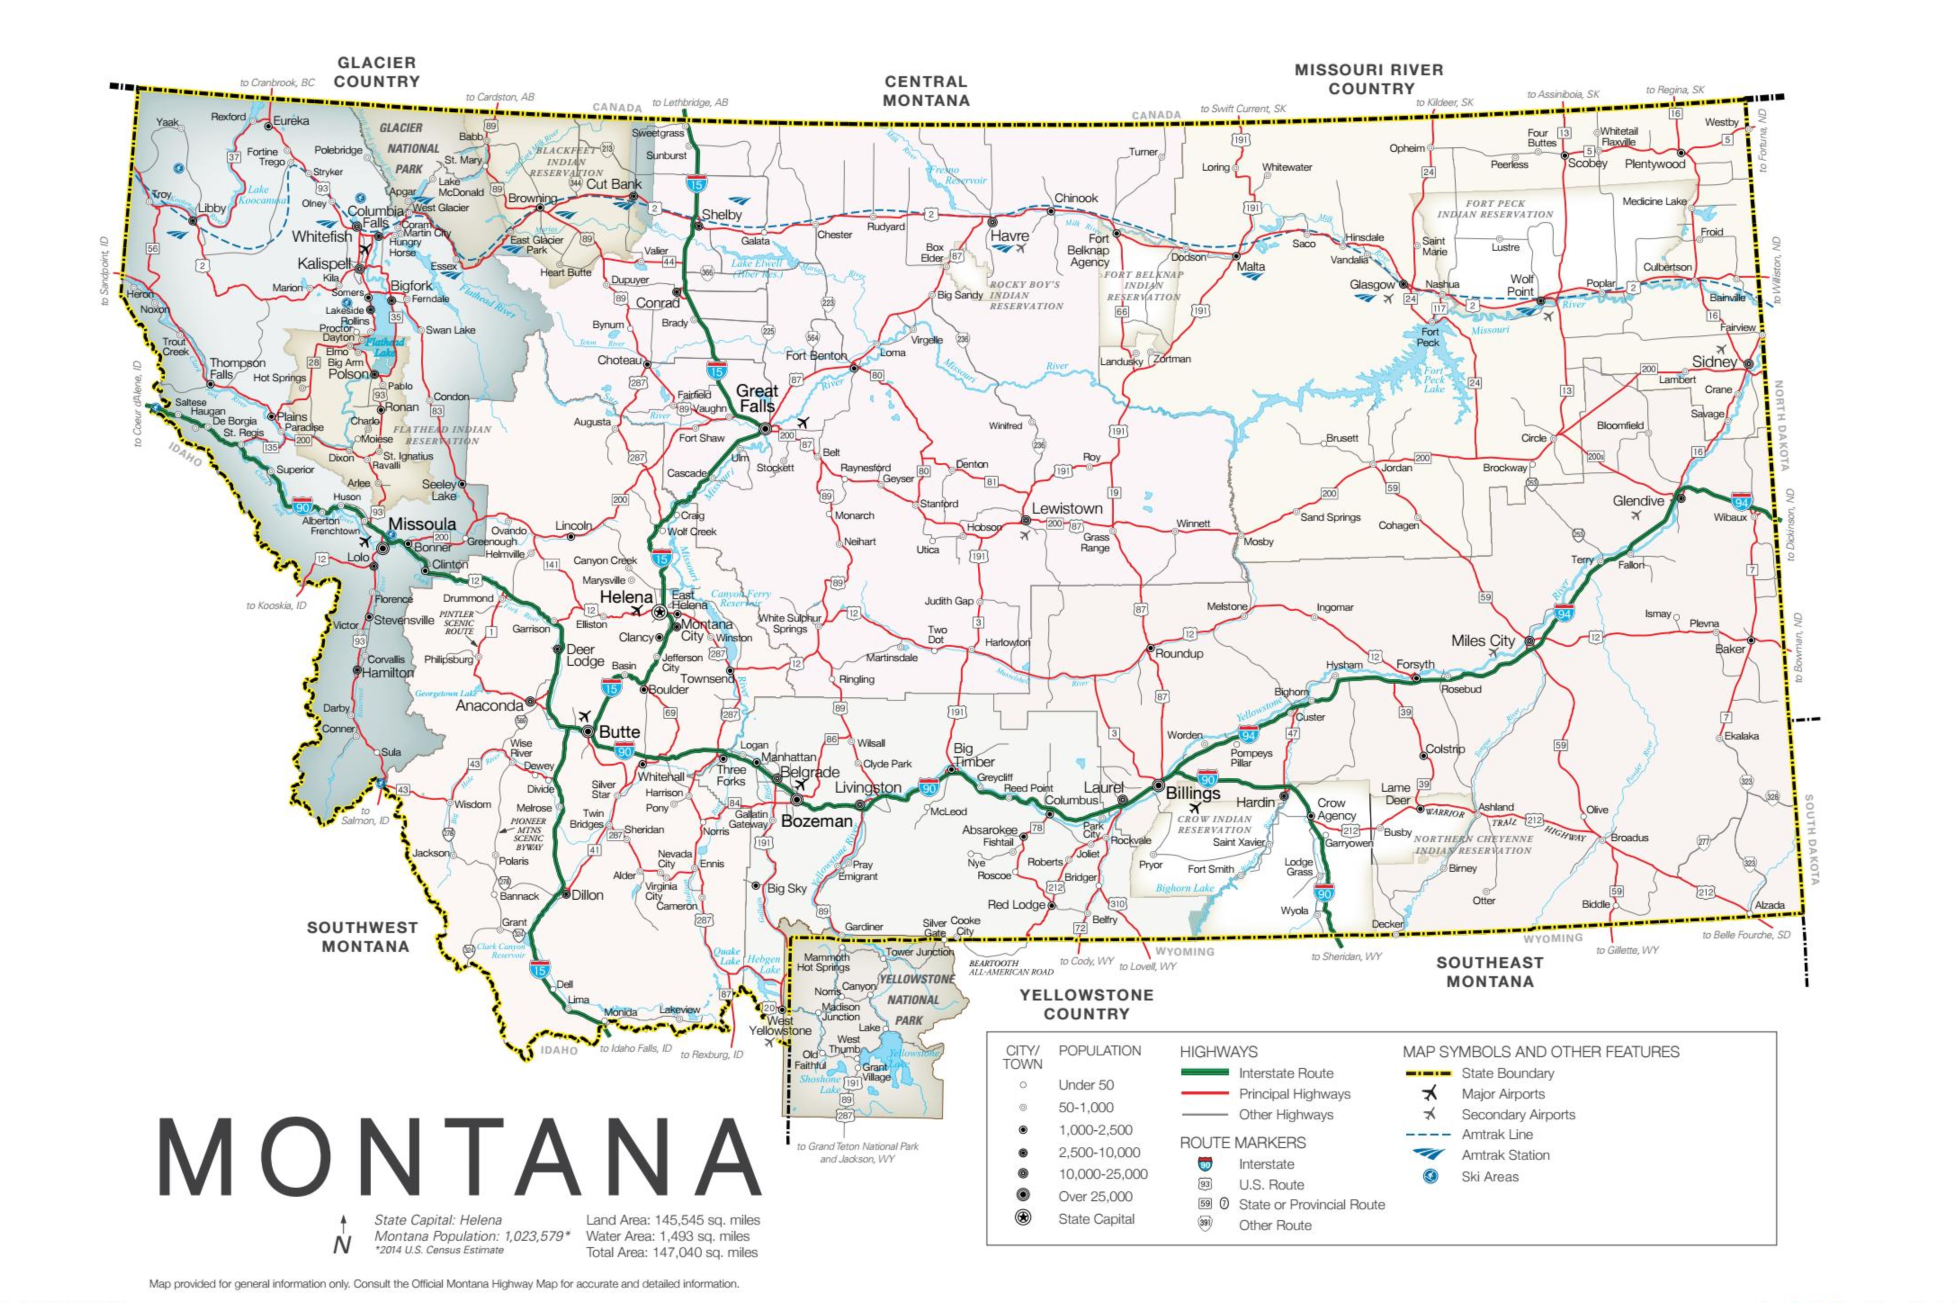 Glacier Country's Montana Highway Map